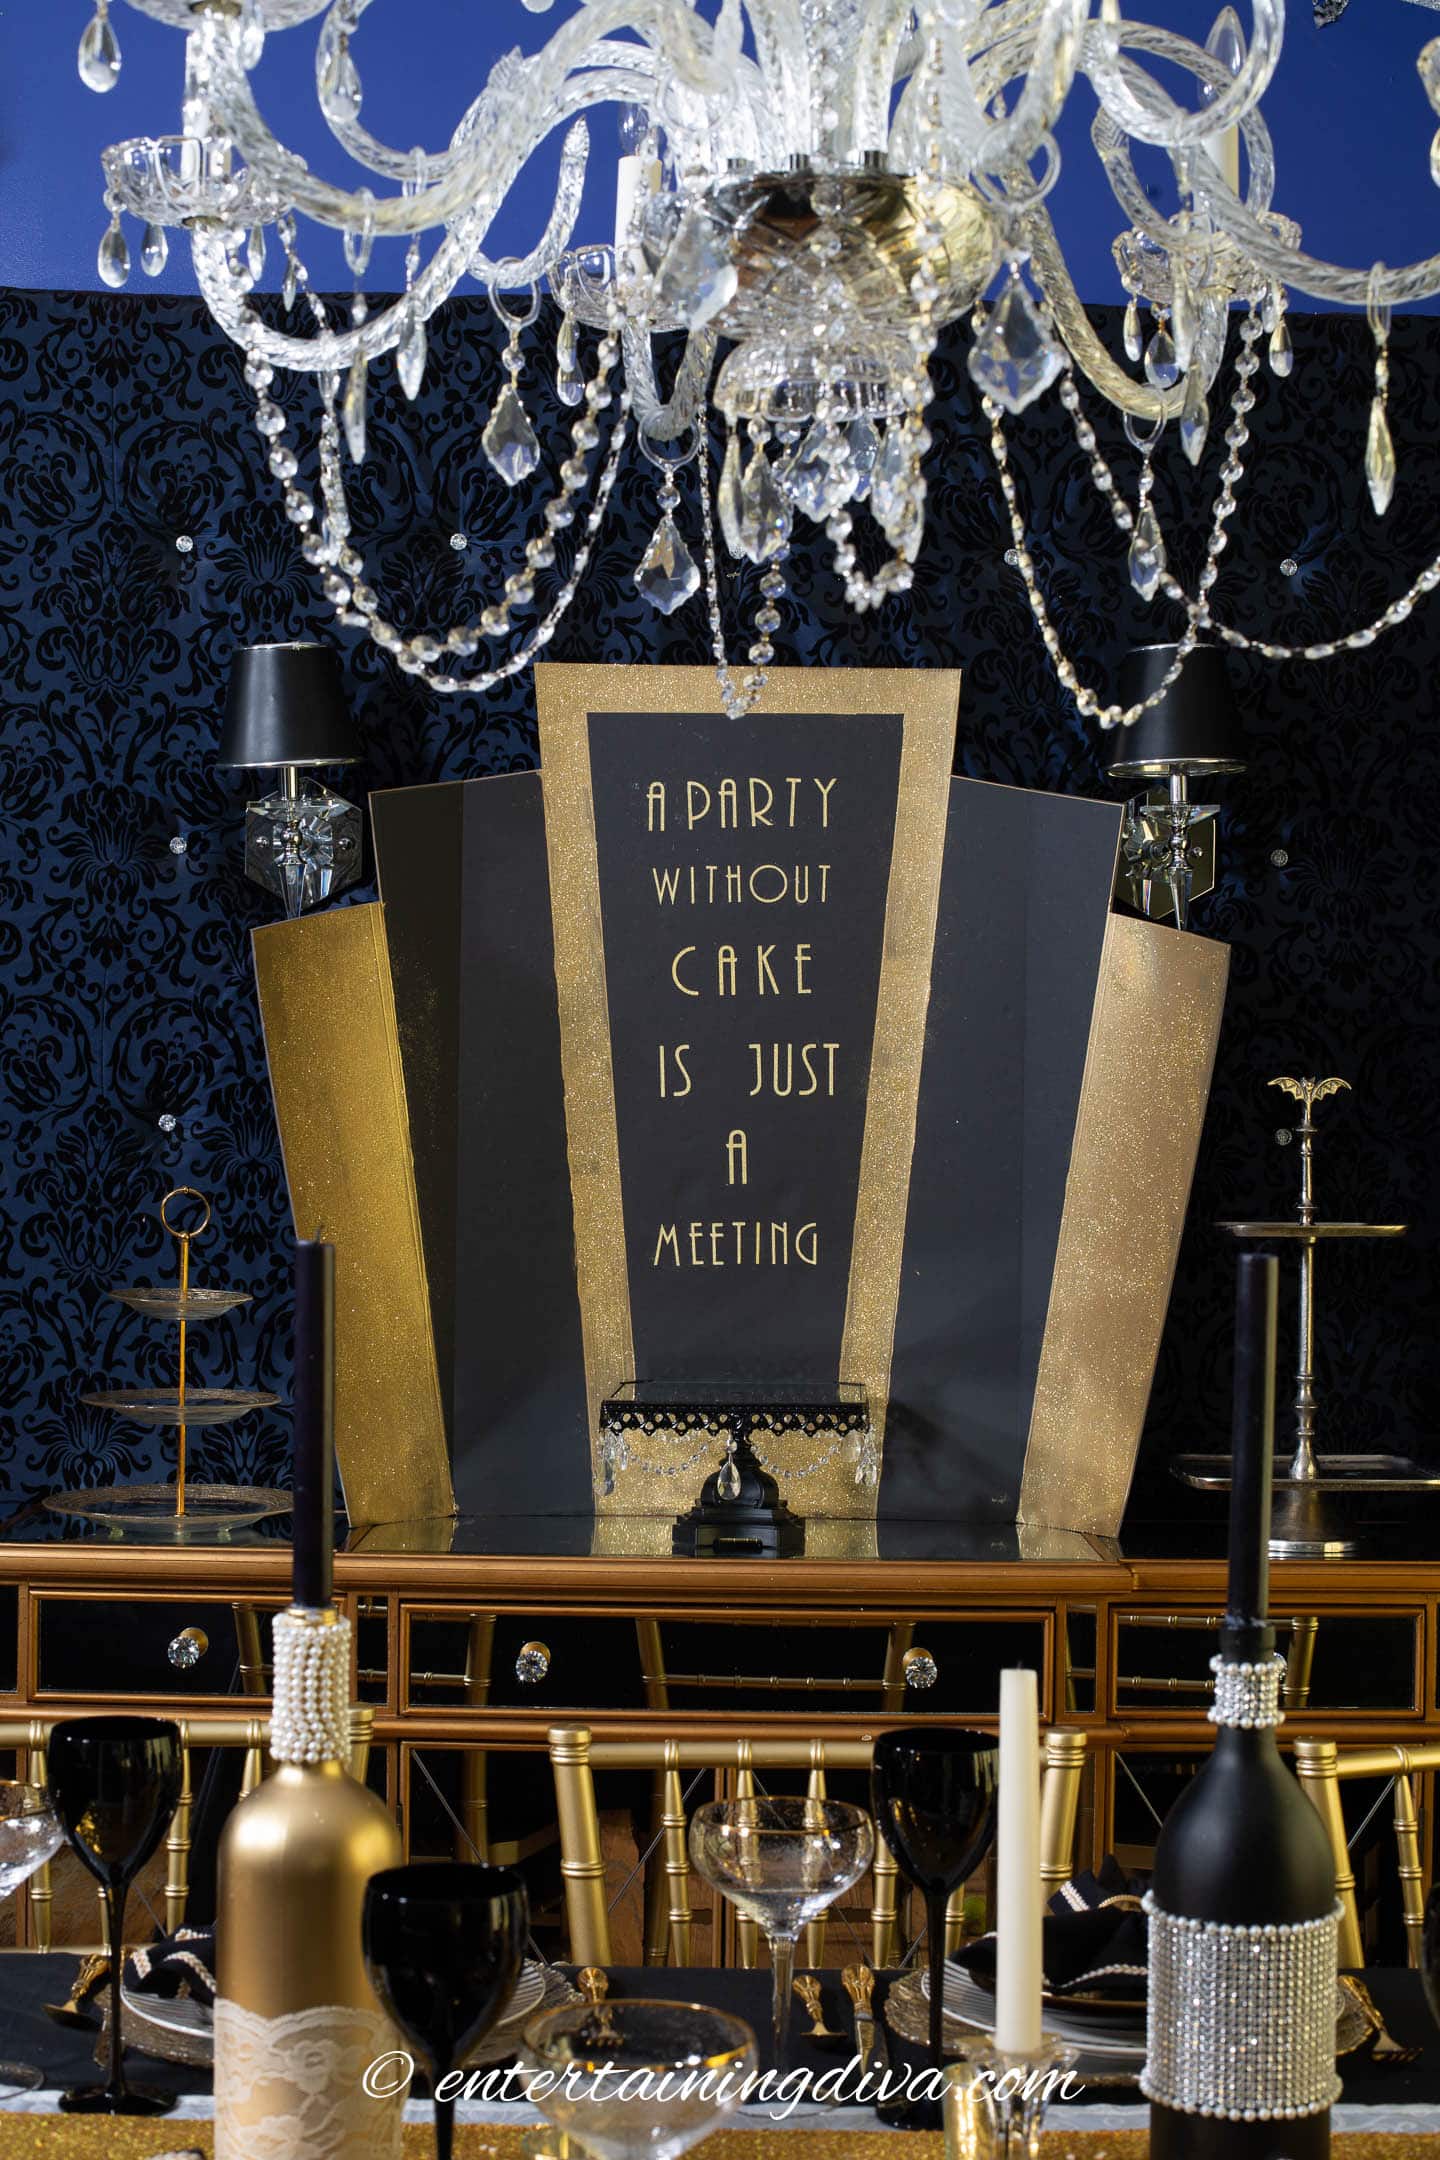 Black and gold Art Deco dessert table backdrop with the text "A Party Without Cake Is Just A Meeting" on the front